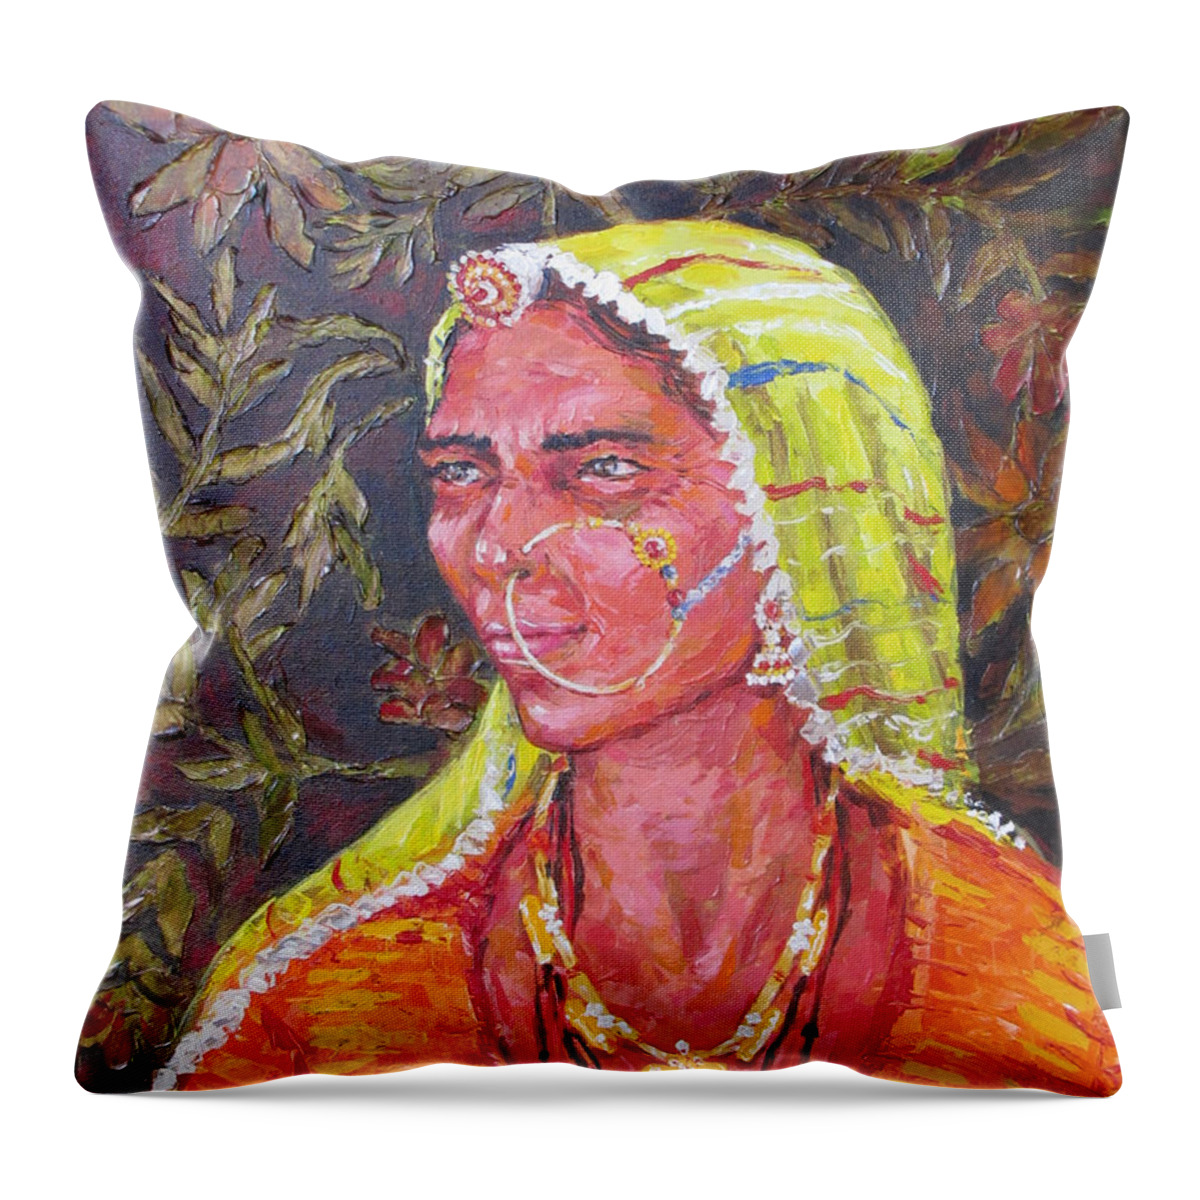 Tribal Woman Throw Pillow featuring the painting The Tribal Woman by Jyotika Shroff